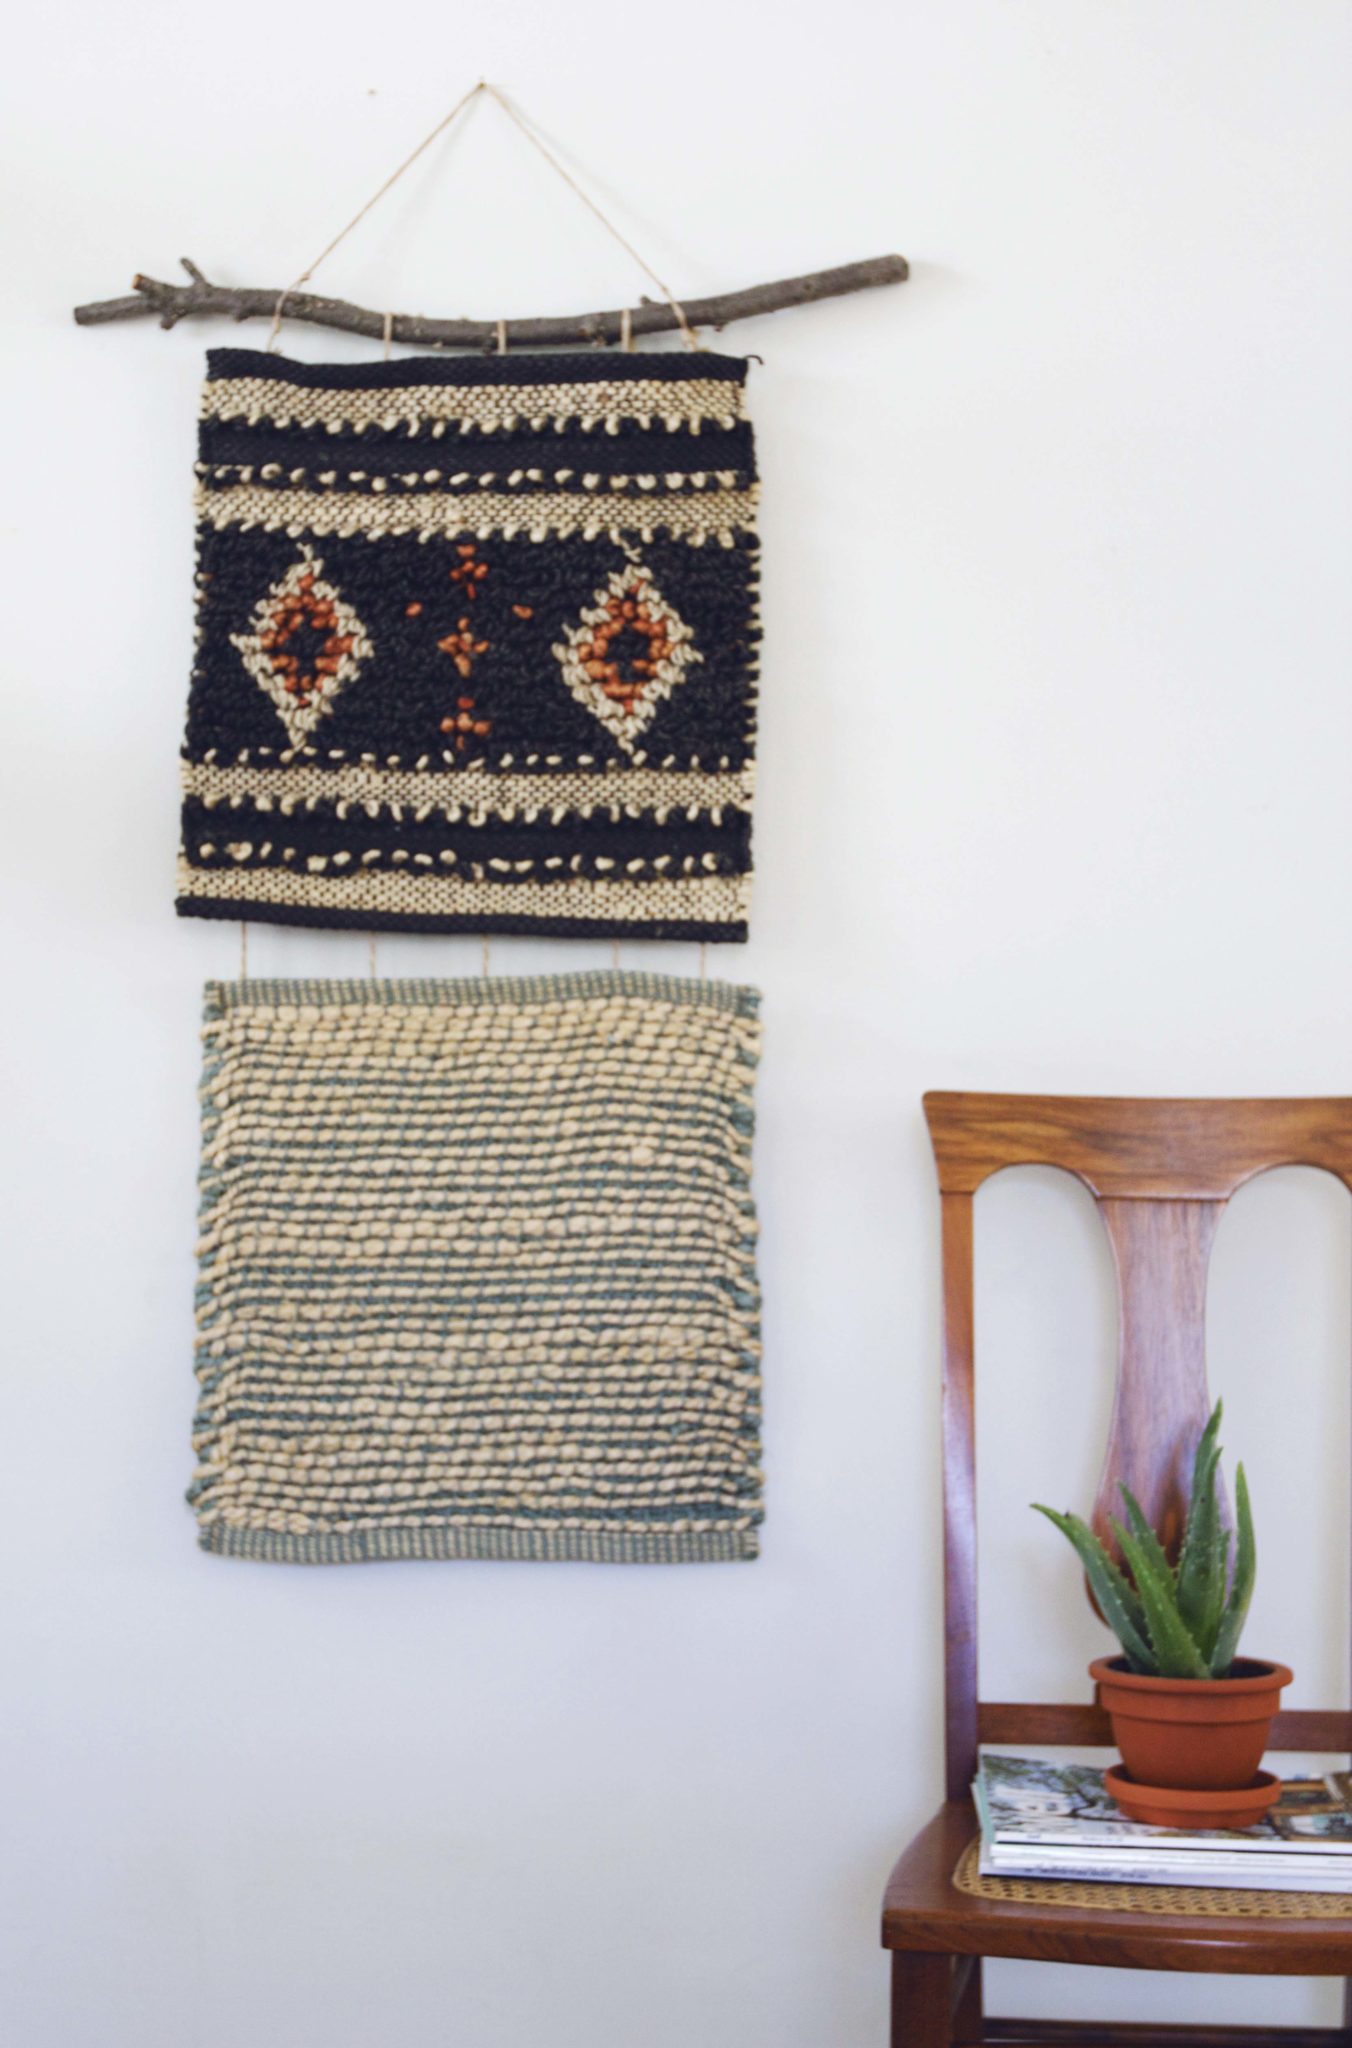 How To Make a Wall Hanging Without A Loom - Annabode - Denver's #1 ...